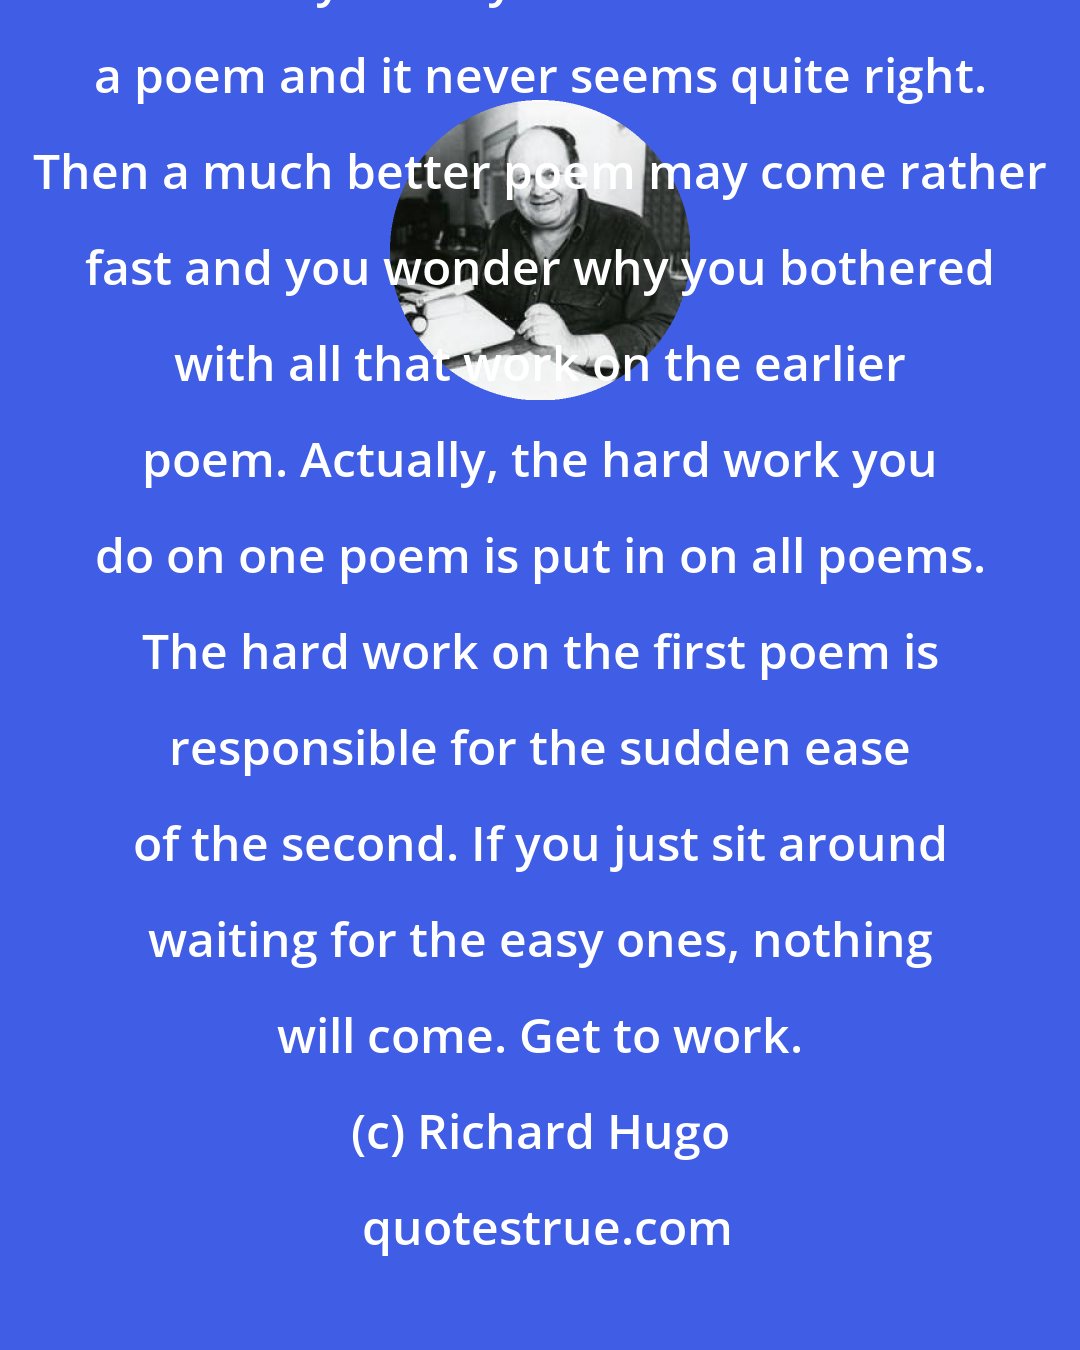 Richard Hugo: Lucky accidents seldom happen to writers who don't work. You will find that you may rewrite and rewrite a poem and it never seems quite right. Then a much better poem may come rather fast and you wonder why you bothered with all that work on the earlier poem. Actually, the hard work you do on one poem is put in on all poems. The hard work on the first poem is responsible for the sudden ease of the second. If you just sit around waiting for the easy ones, nothing will come. Get to work.